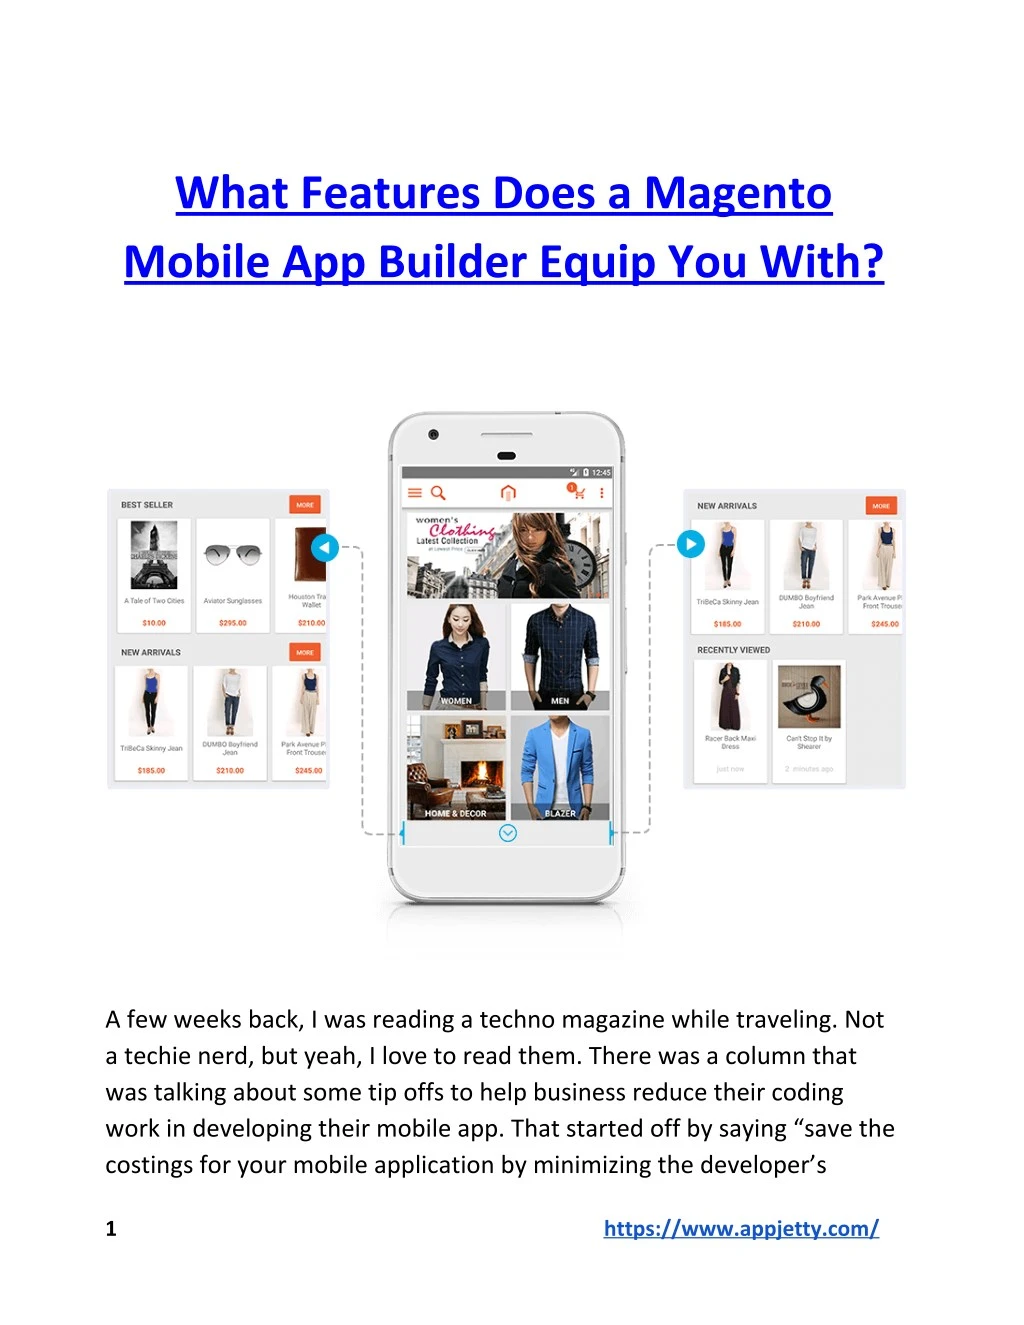 what features does a magento mobile app builder